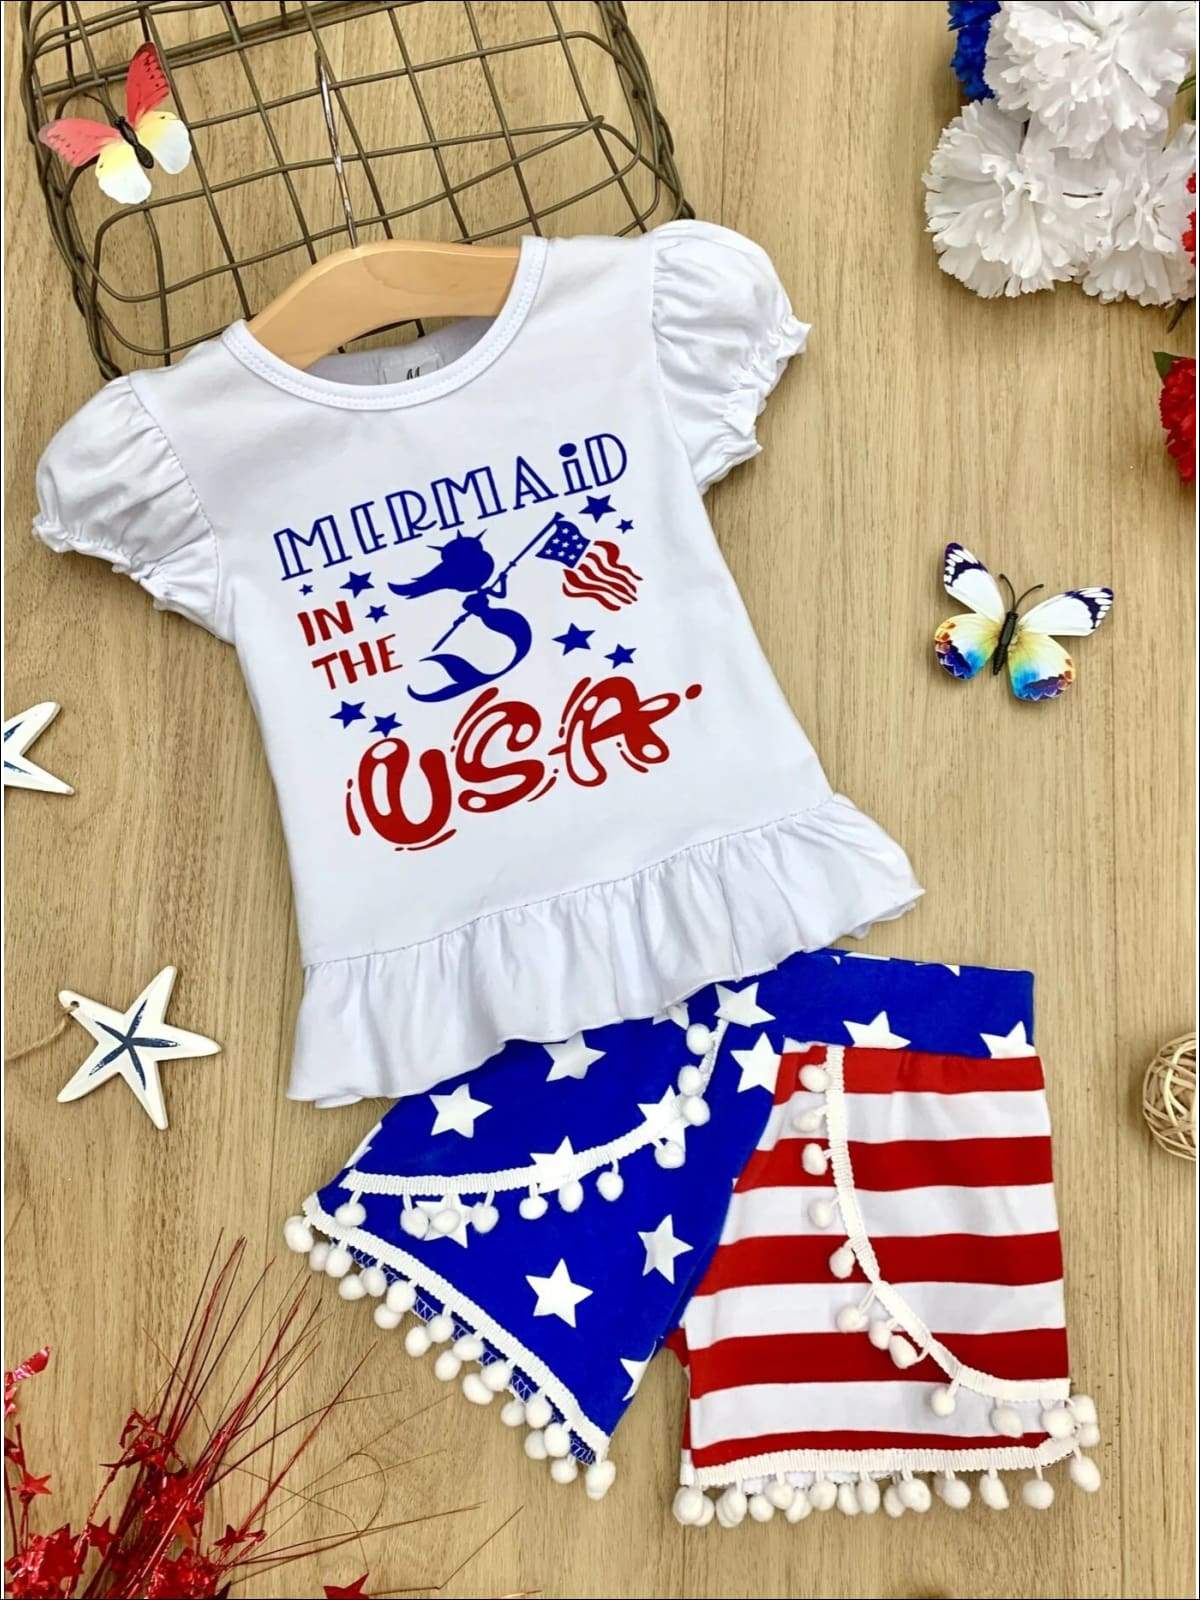 Girls 4th of July Themed Mermaid in the USA Ruffled Top & American Flag Print Pom Pom Shorts Set - Blue / XS-2T - Girls 4th of July Set